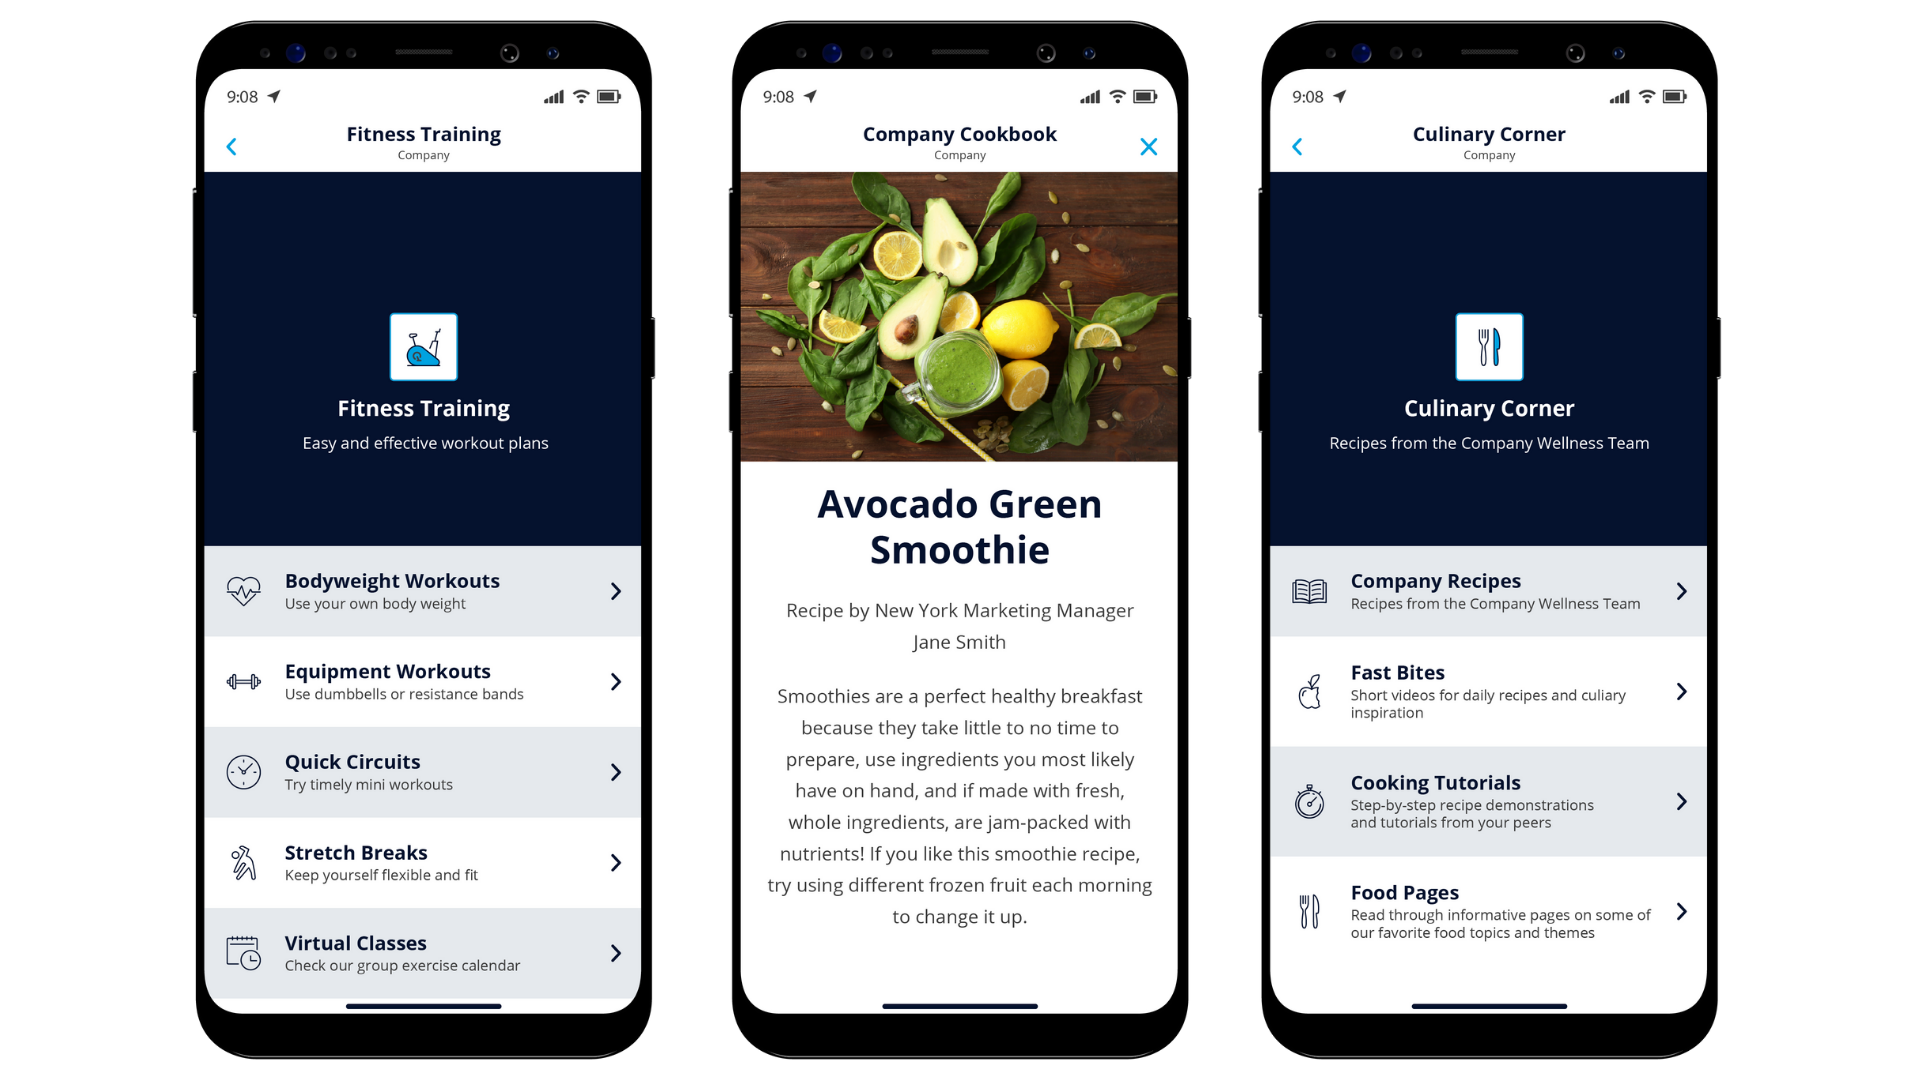 Screens from an employee mobile app showcase a variety of health & wellness features like recipes, and fitness regimens. 